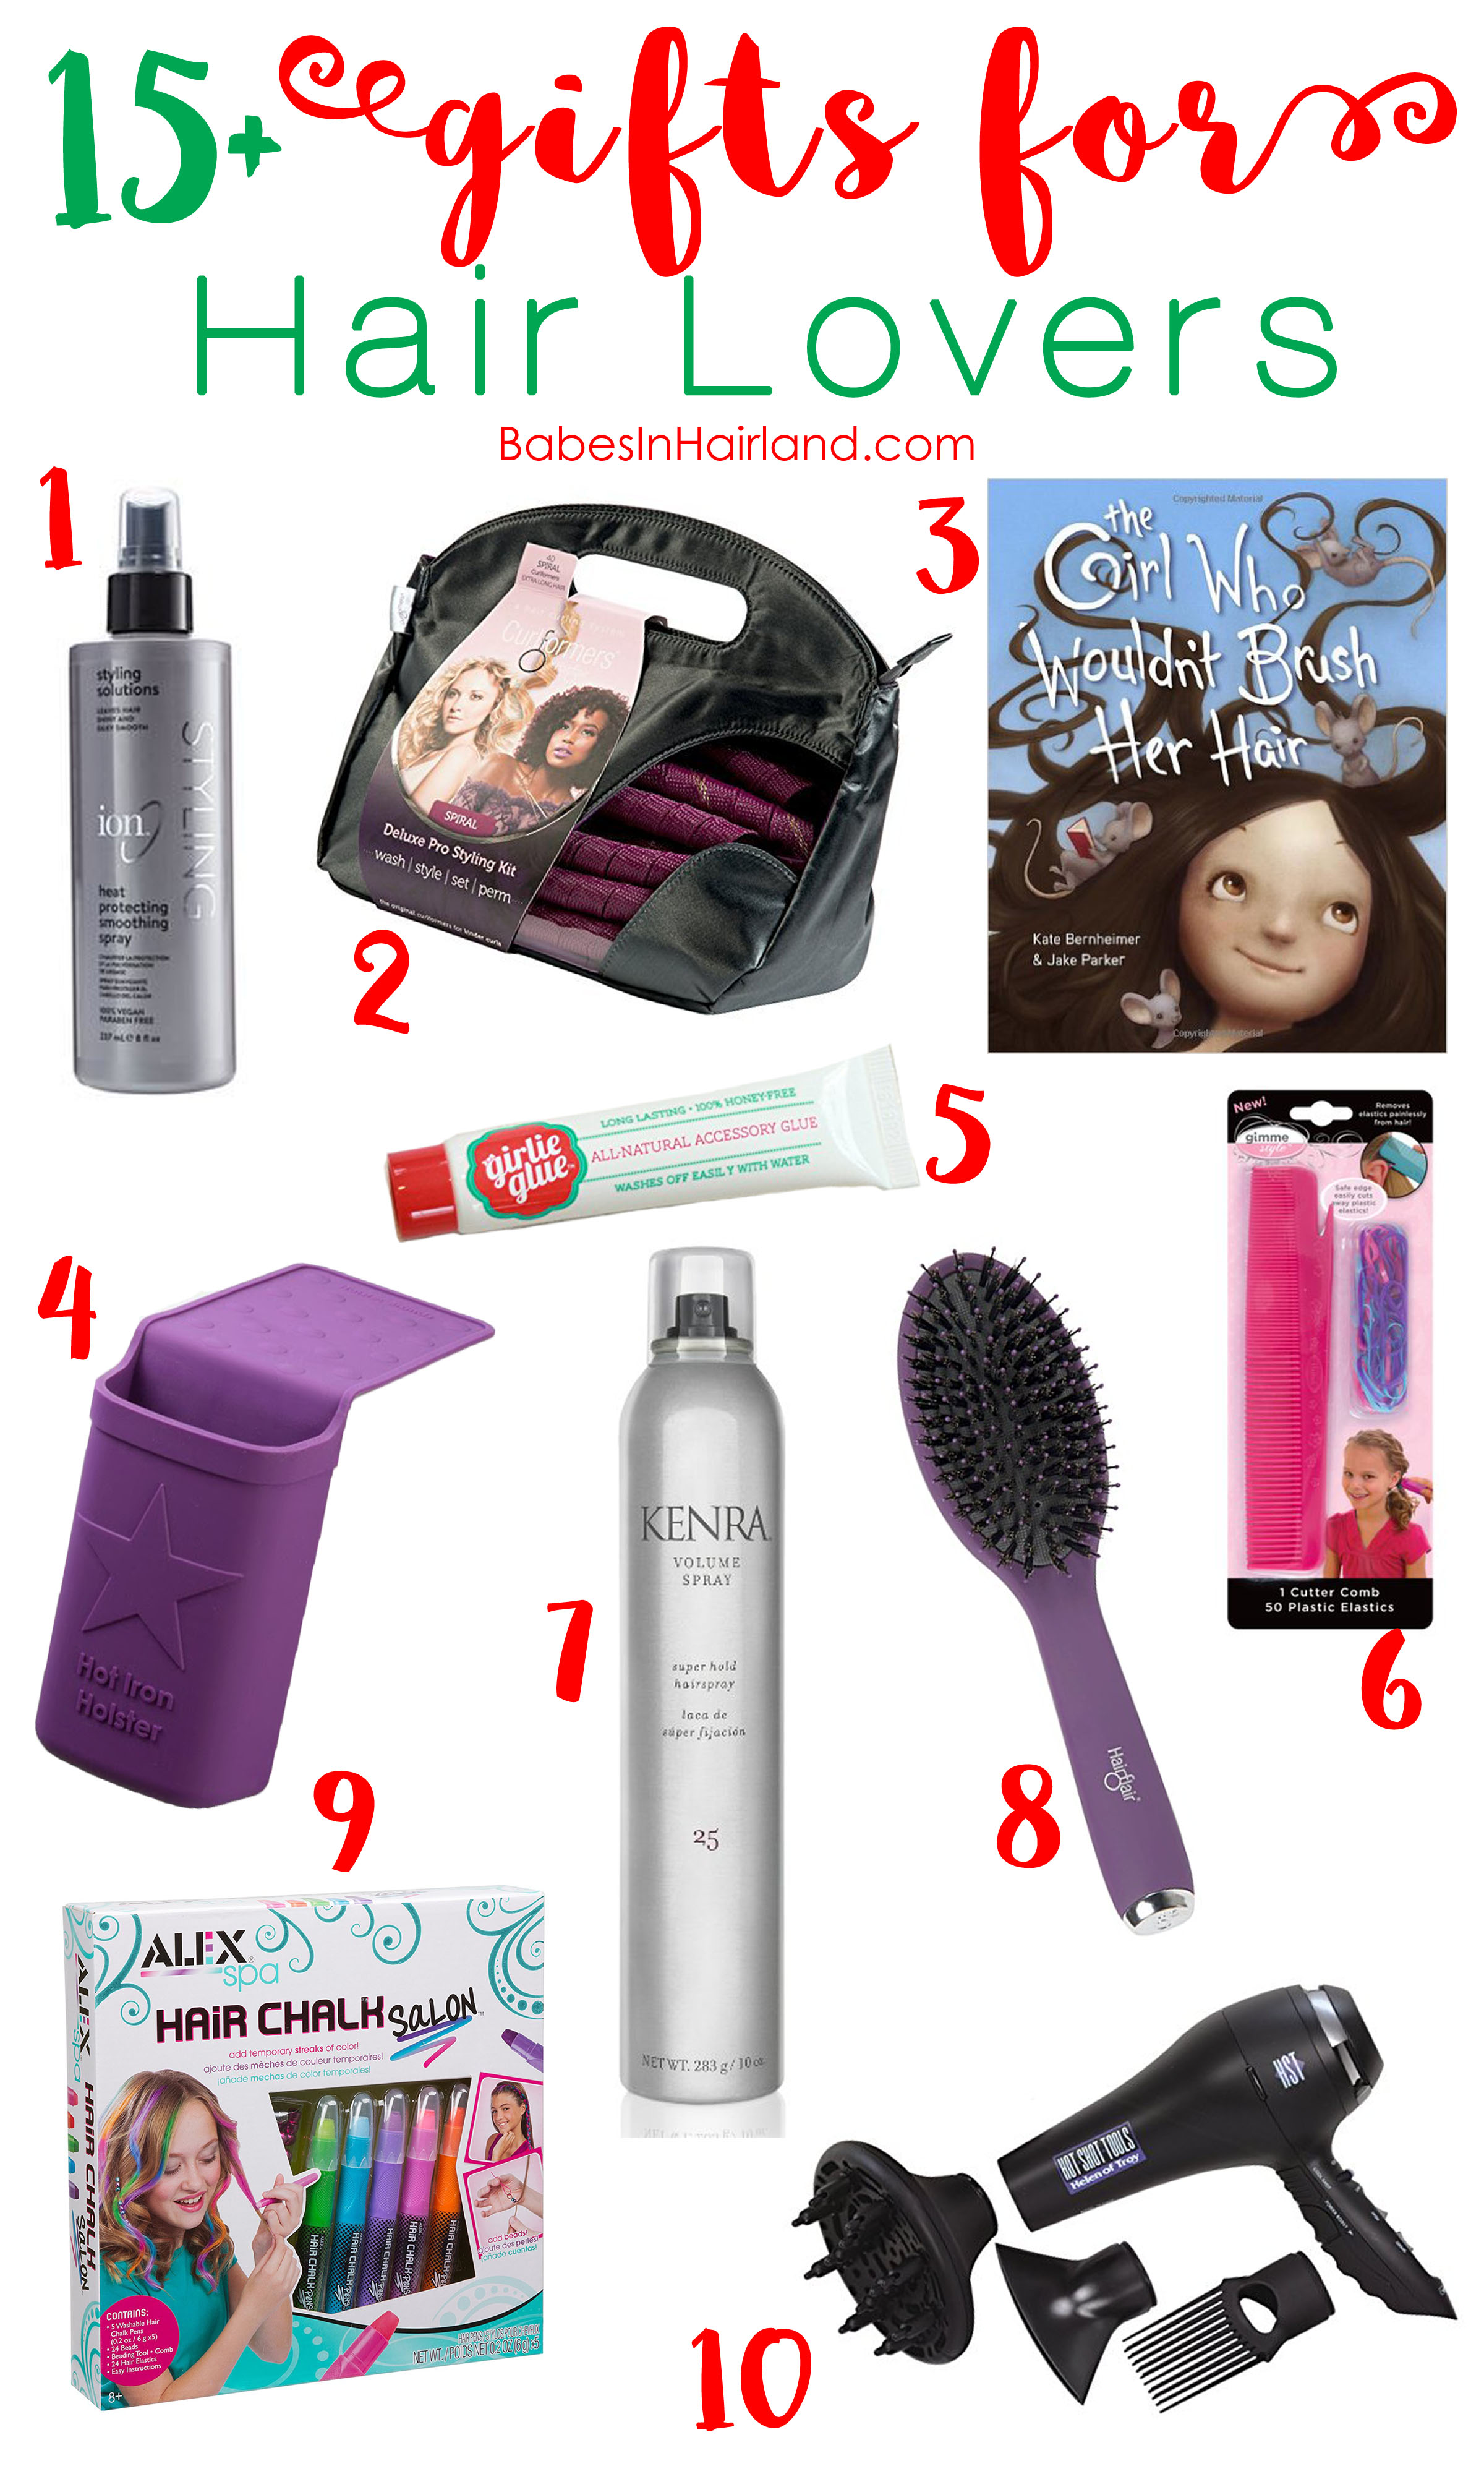 Haircare product giveaways